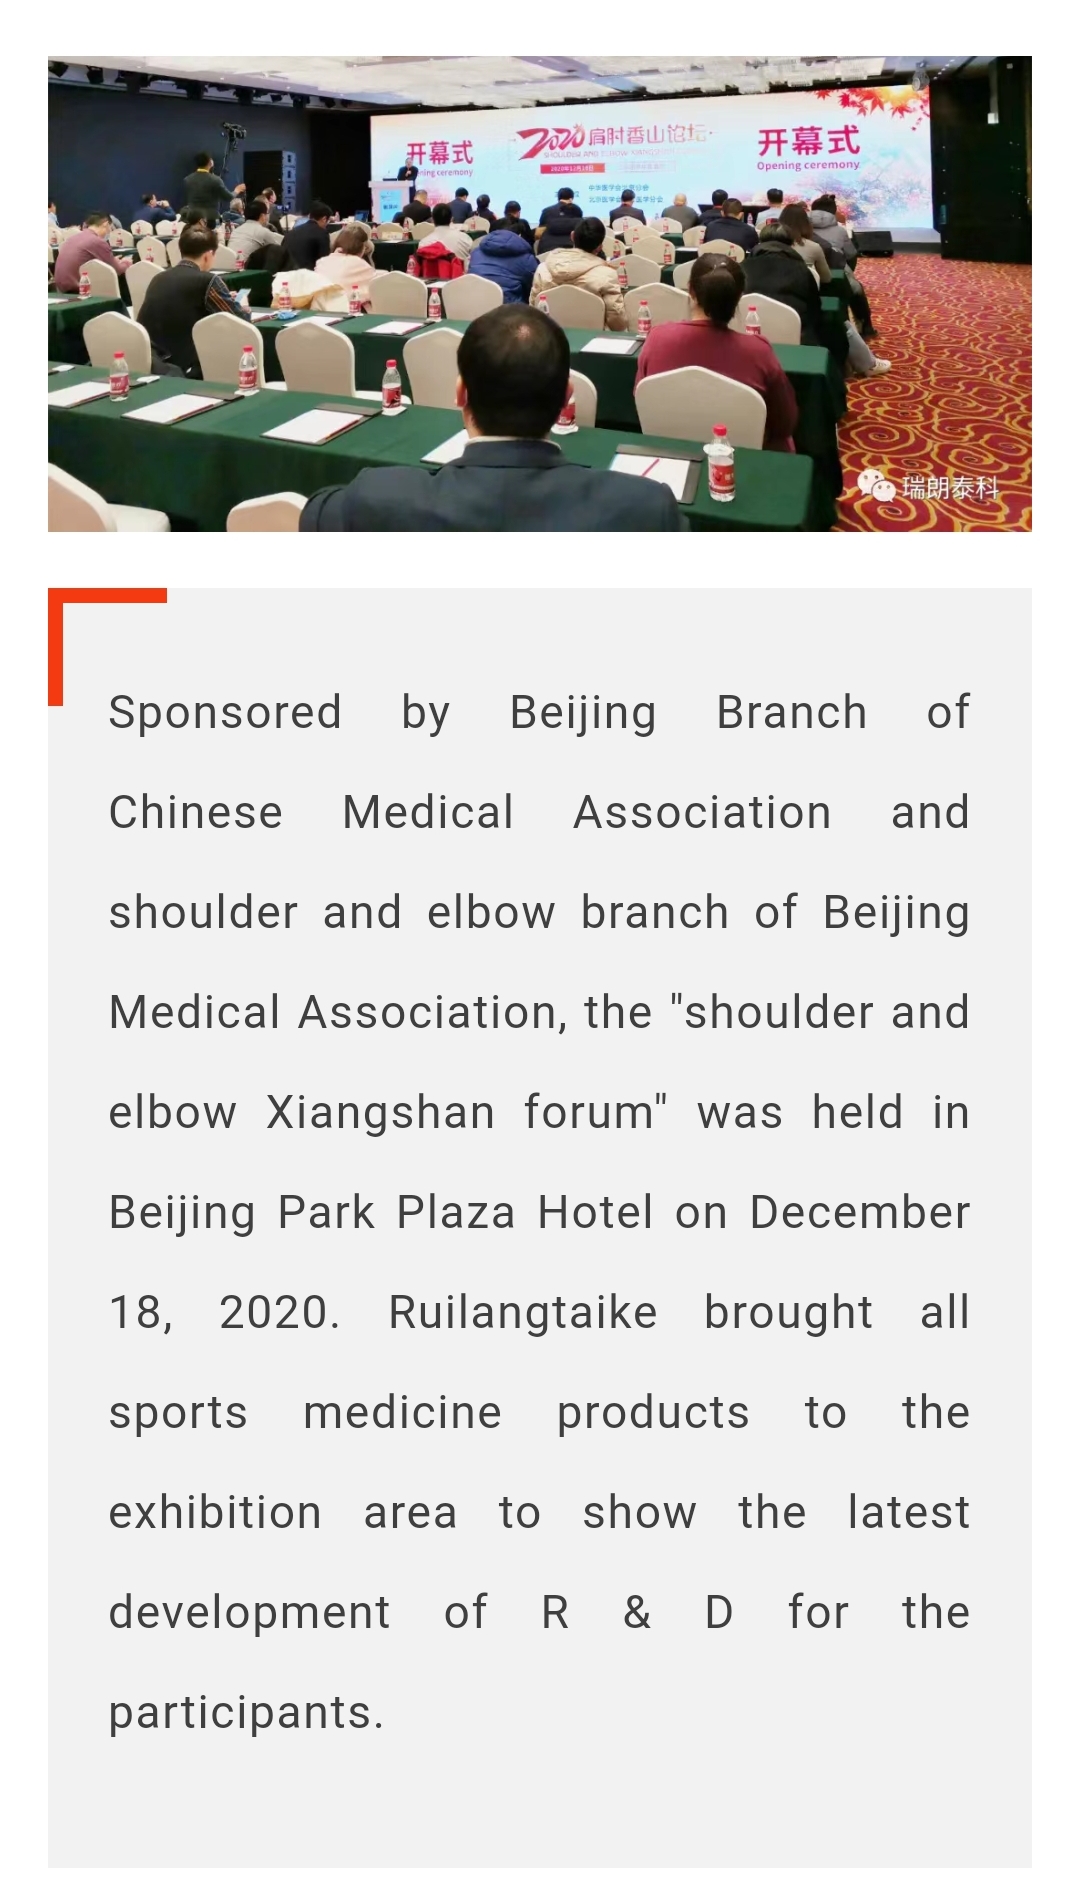 Appearing in Xiangshan forum,Run-Long Medtech creates a high quality brand of sp